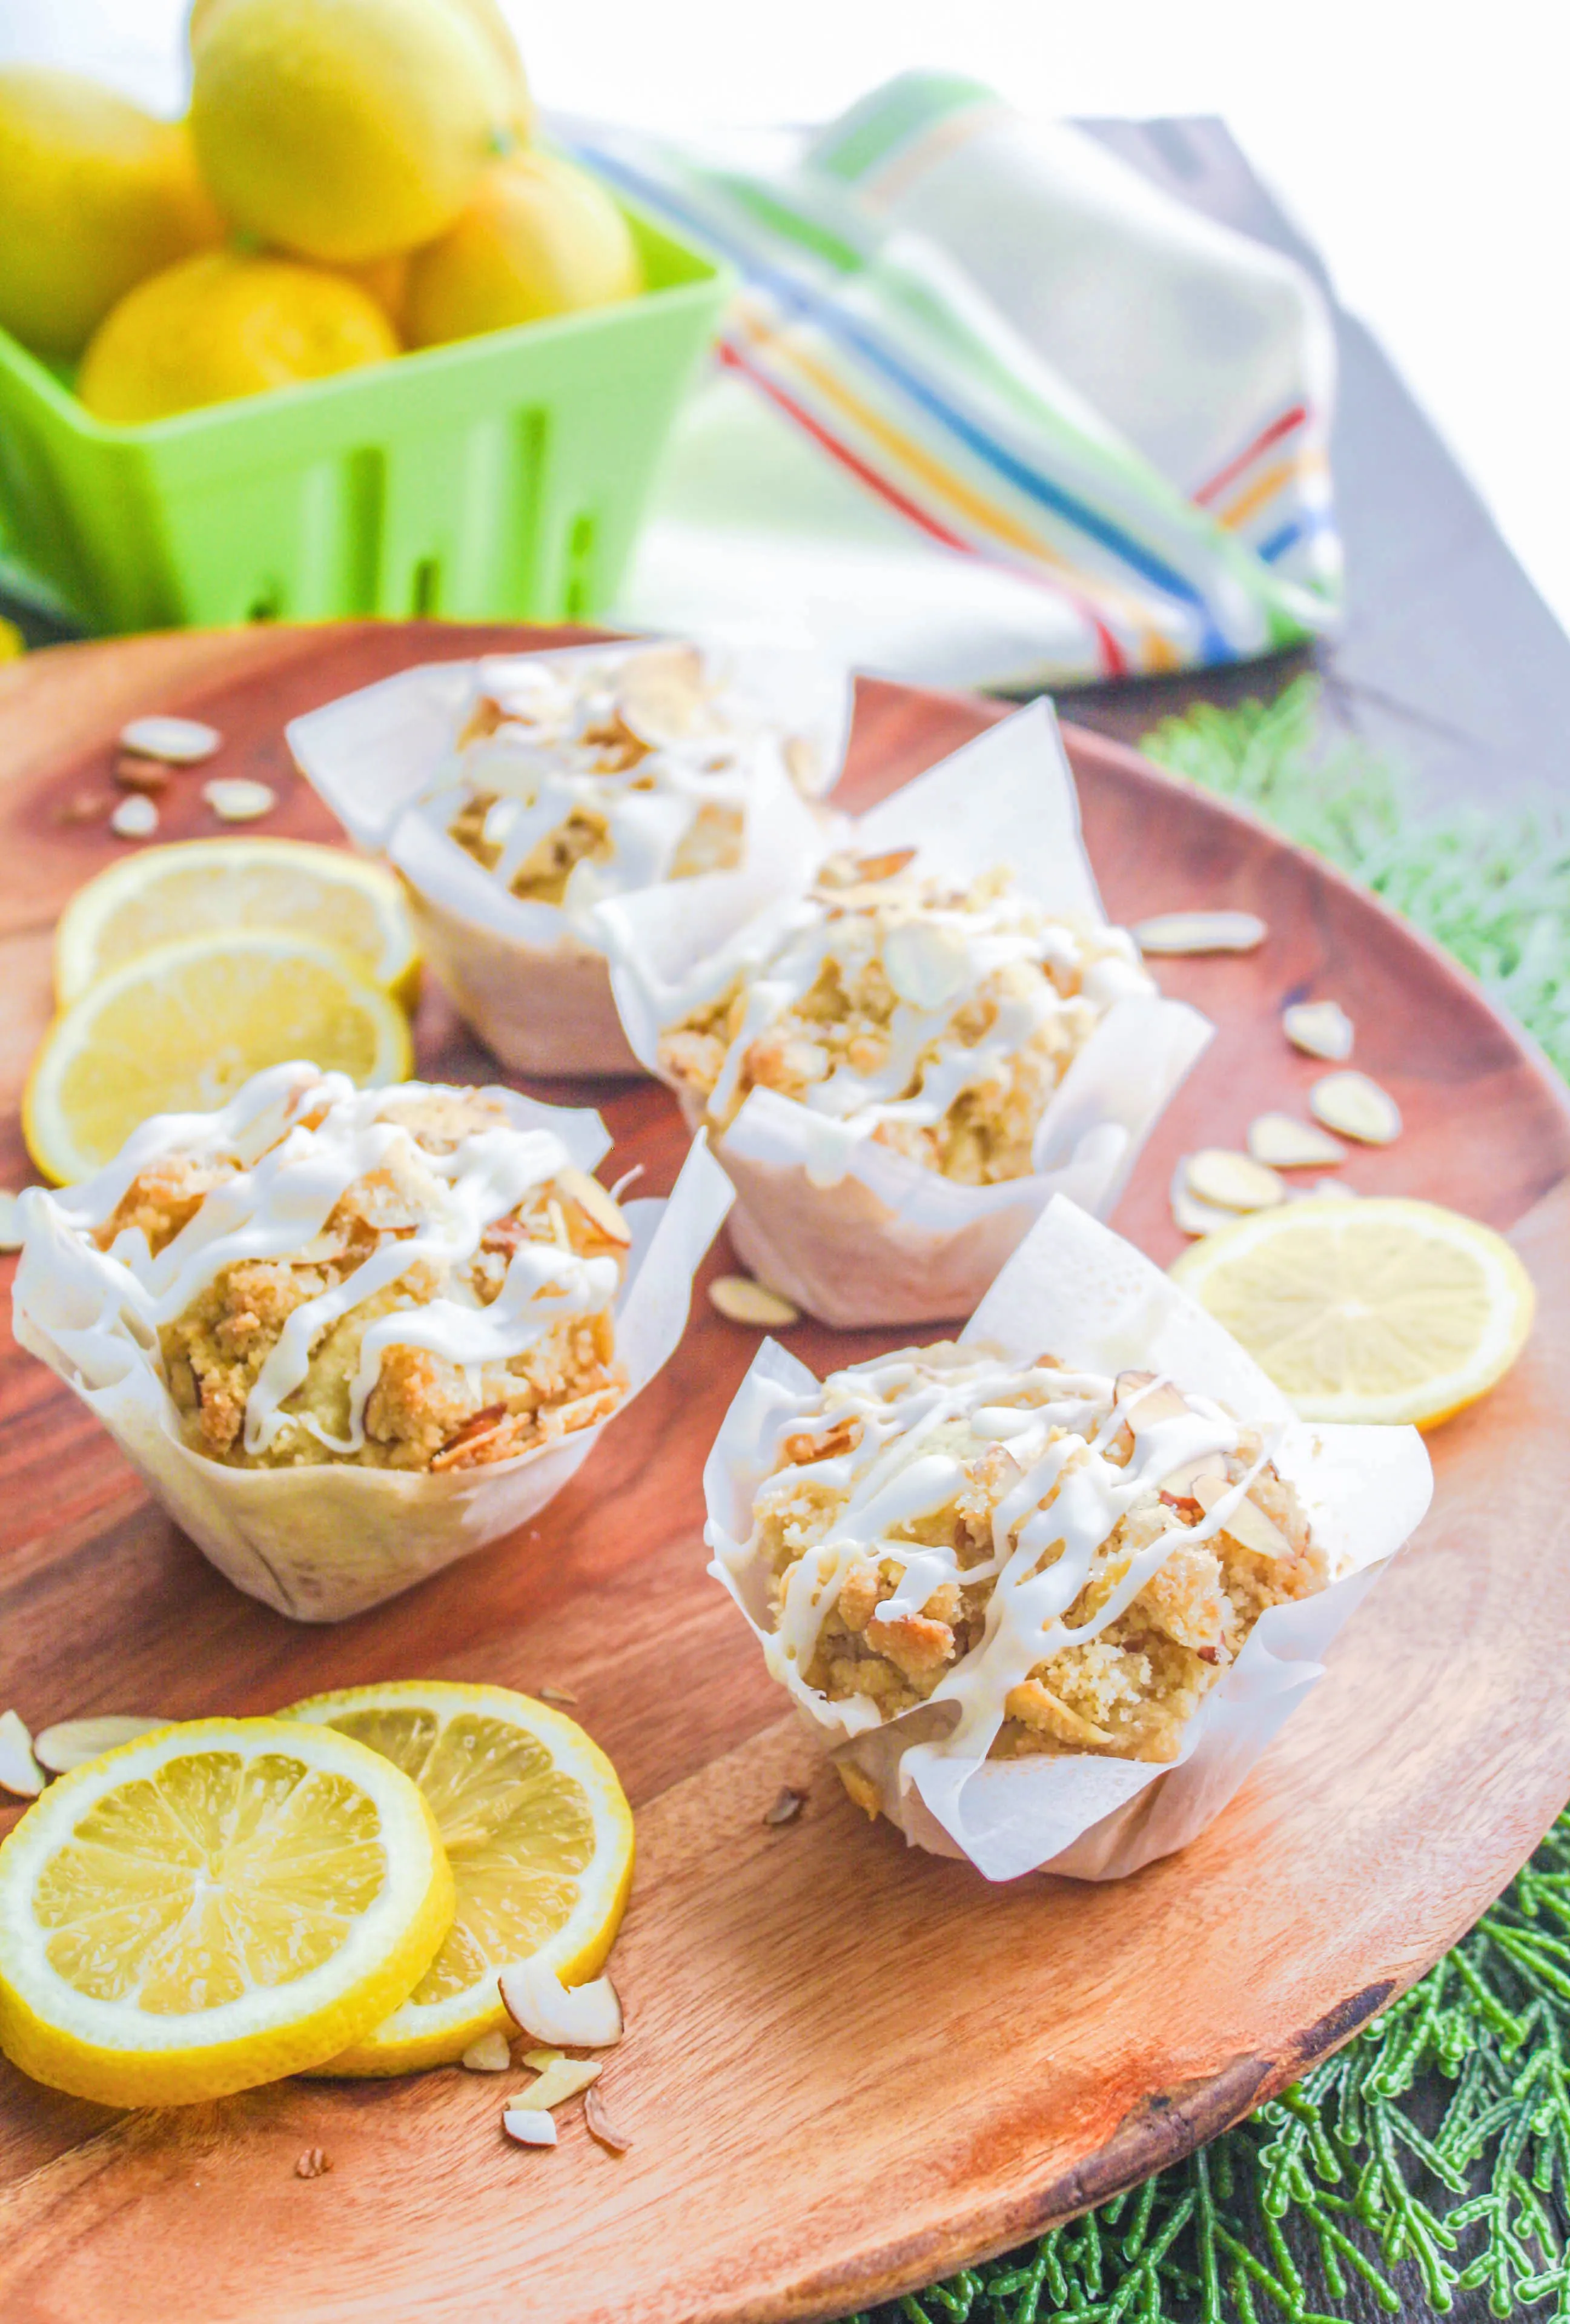 Lemon Muffins with Almond Streusel and Glaze make a wonderful breakfast. You'll love these lemon muffins for breakfast or an afternoon treat!